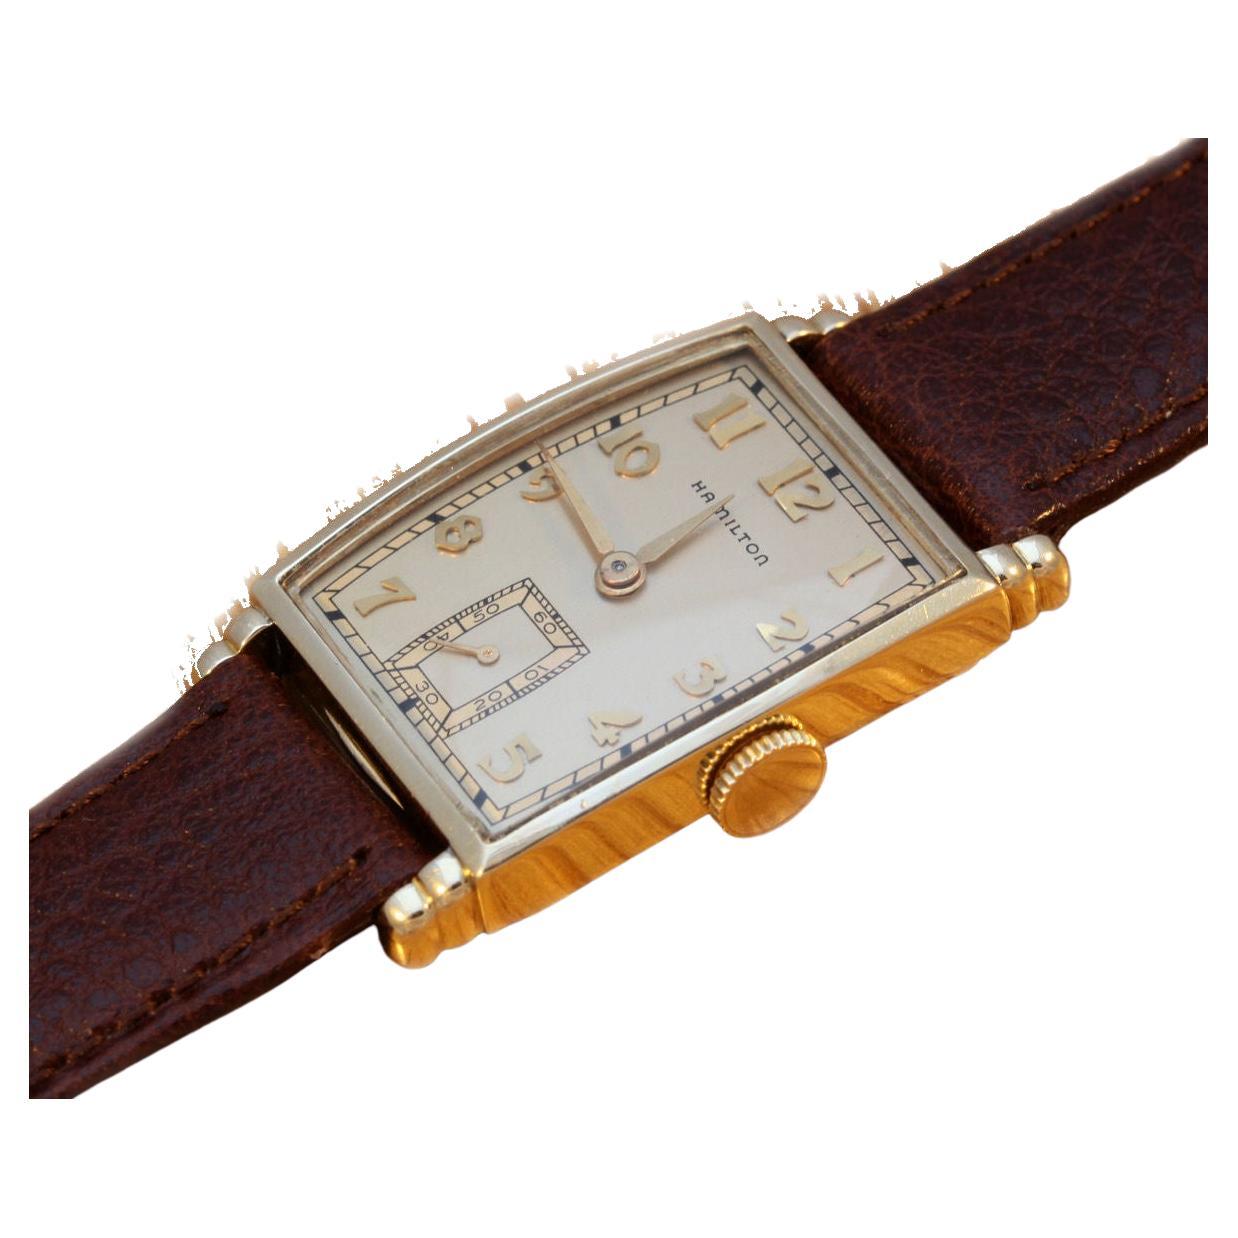 For your consideration is this Hamilton Myron gents watch dating to 1946, Just fully serviced and adjusted with new mainspring, crystal and leather strap. Running strongly and keeping good time.
Hamilton 980 17 jewel hand wound movement with serial